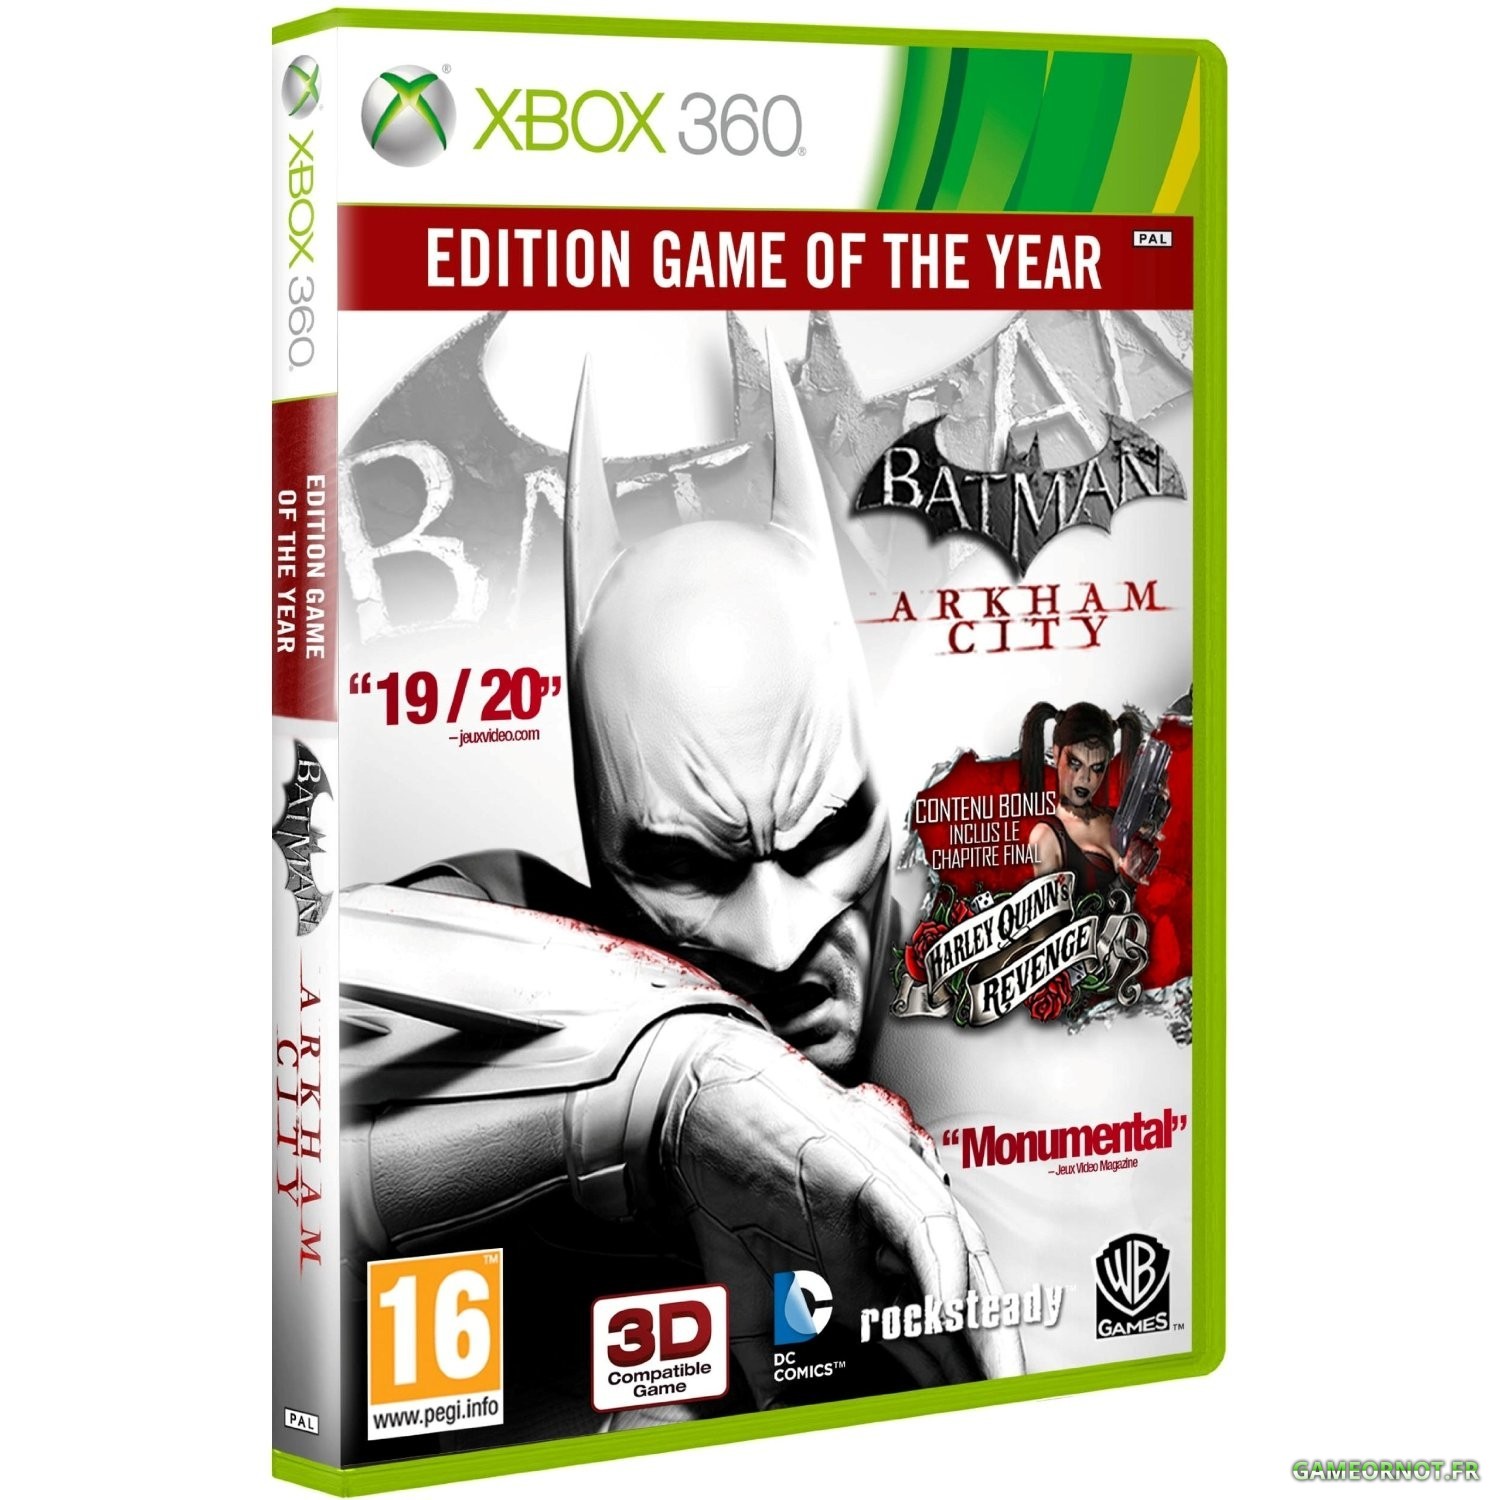 Batman Arkham City - Edition Game of the year